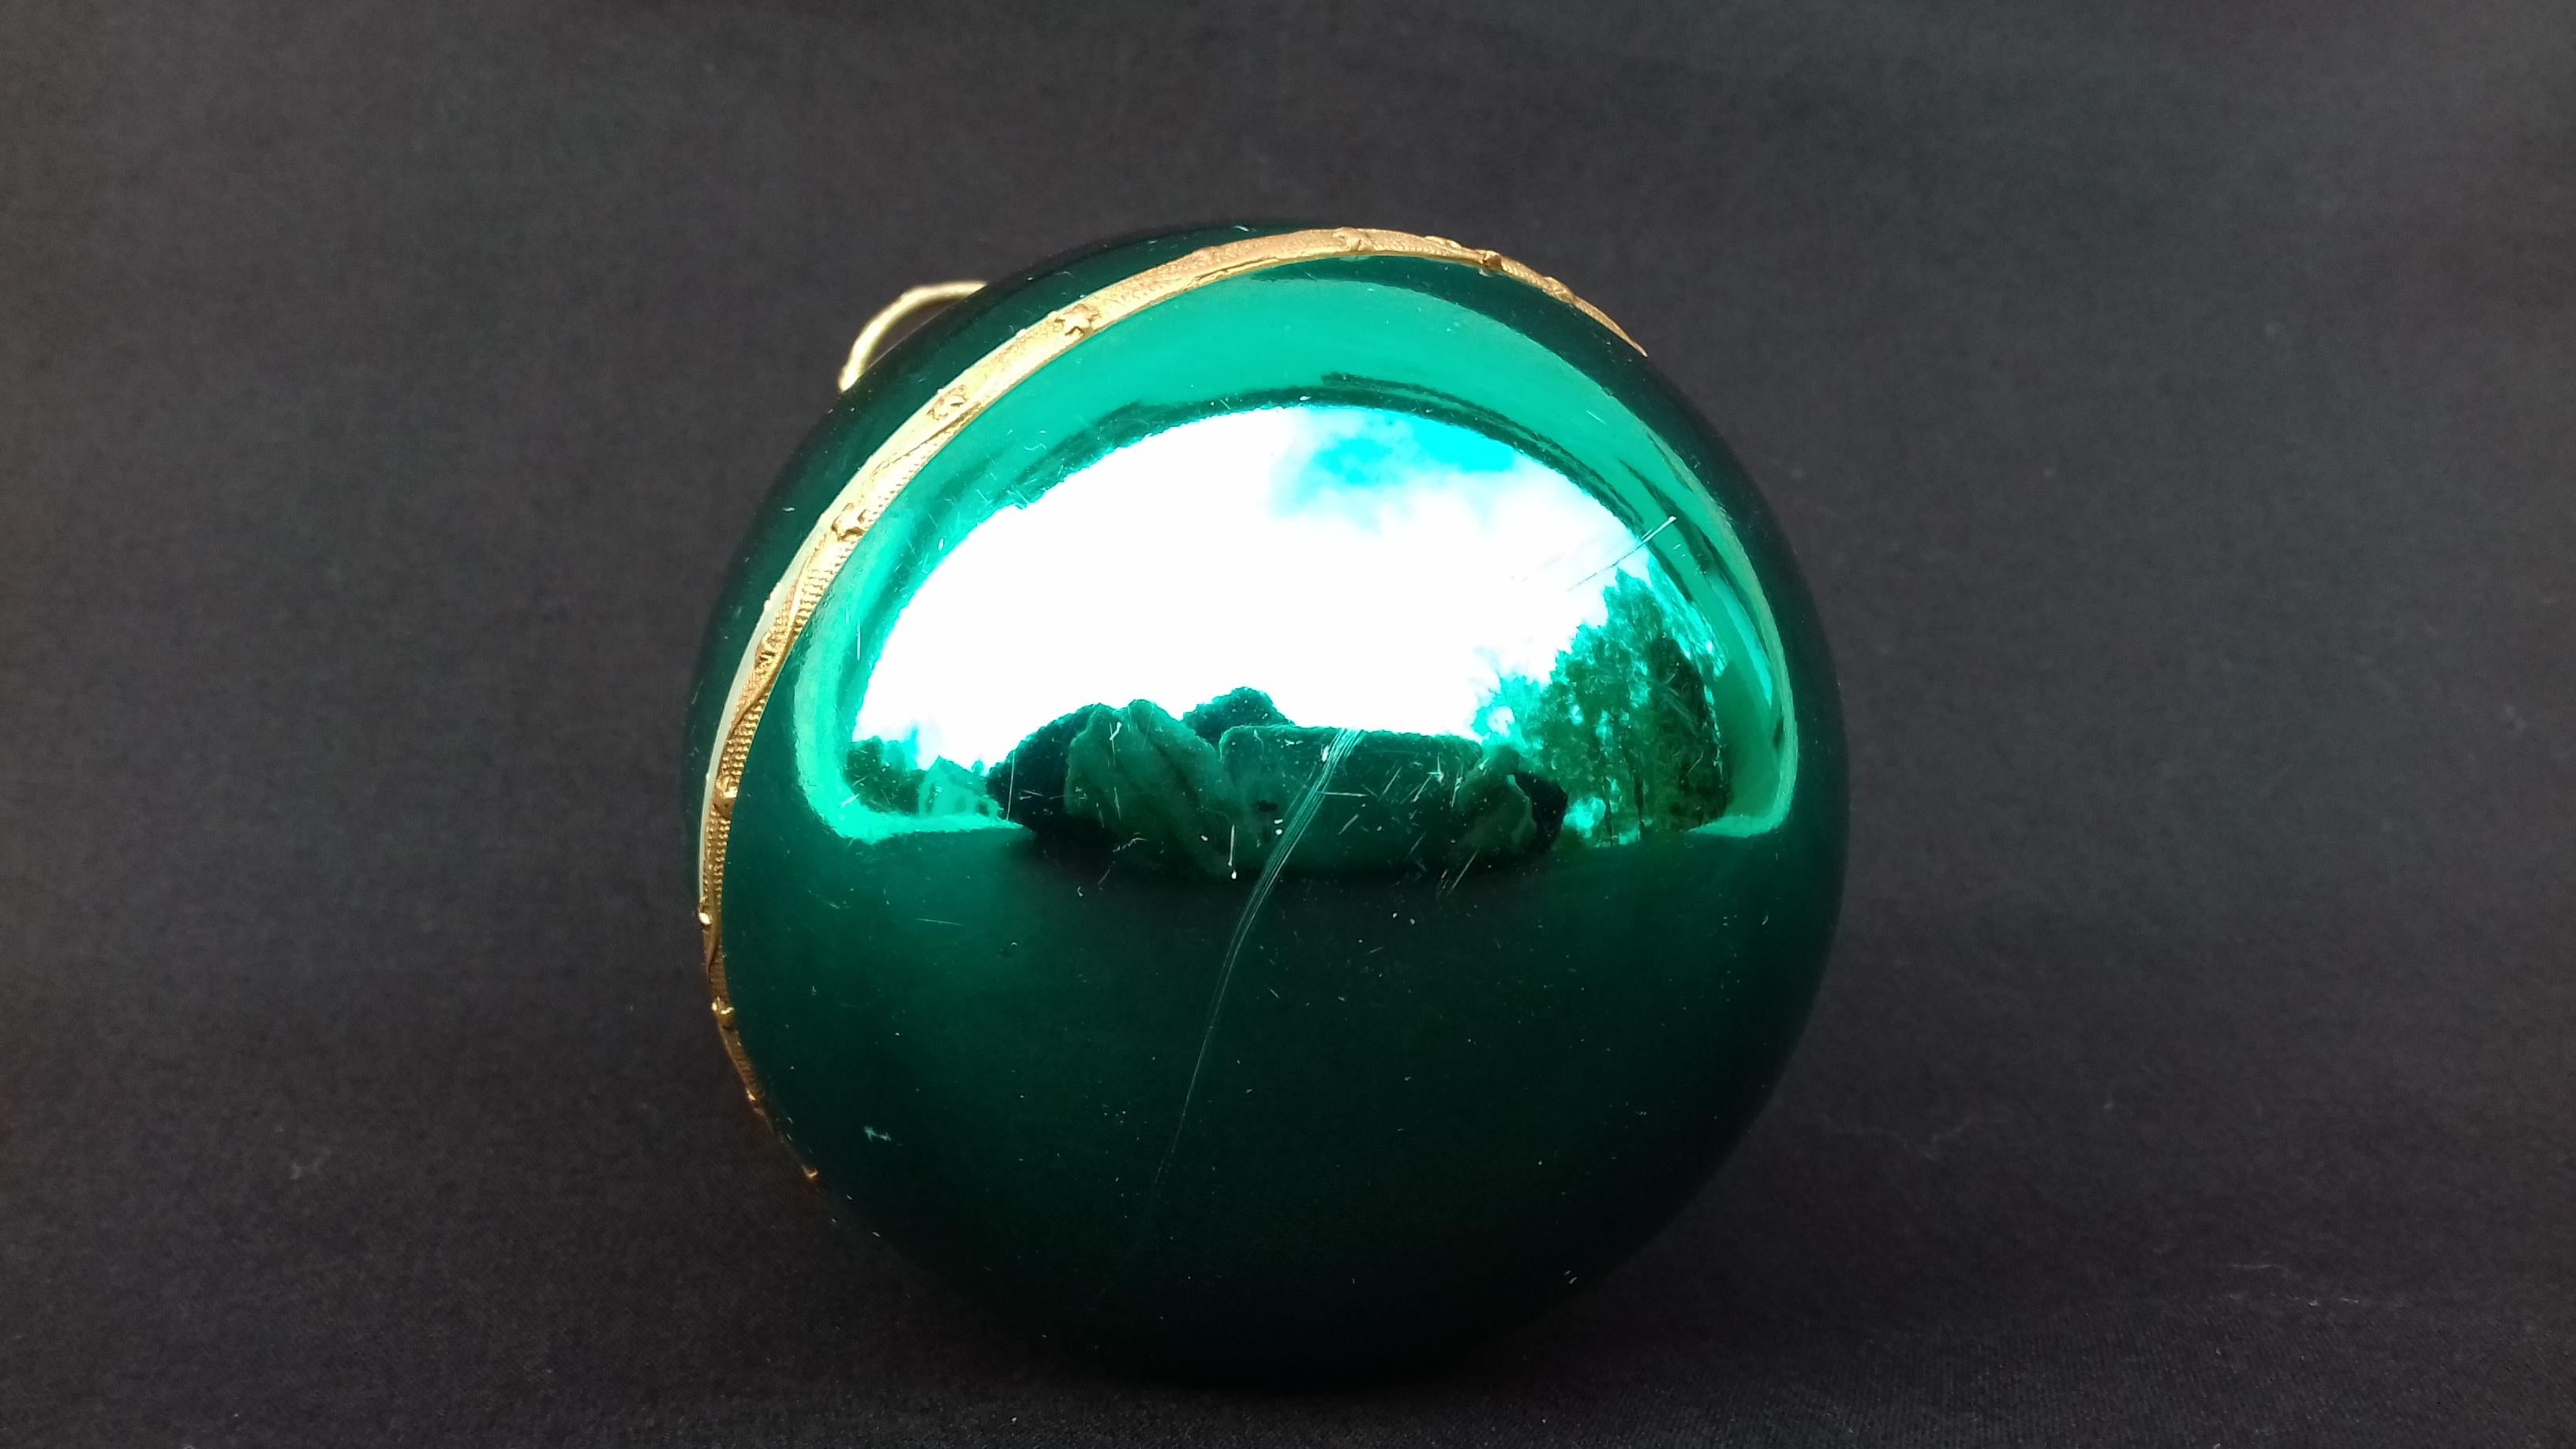 Pull the hook, hang it safely in your Christmas tree, and just hear and look at the magic of Christmas 

Rare and Gorgeous Christmas Ball Music Box !

Pull the hook, a string will come out and go into the ball playing 